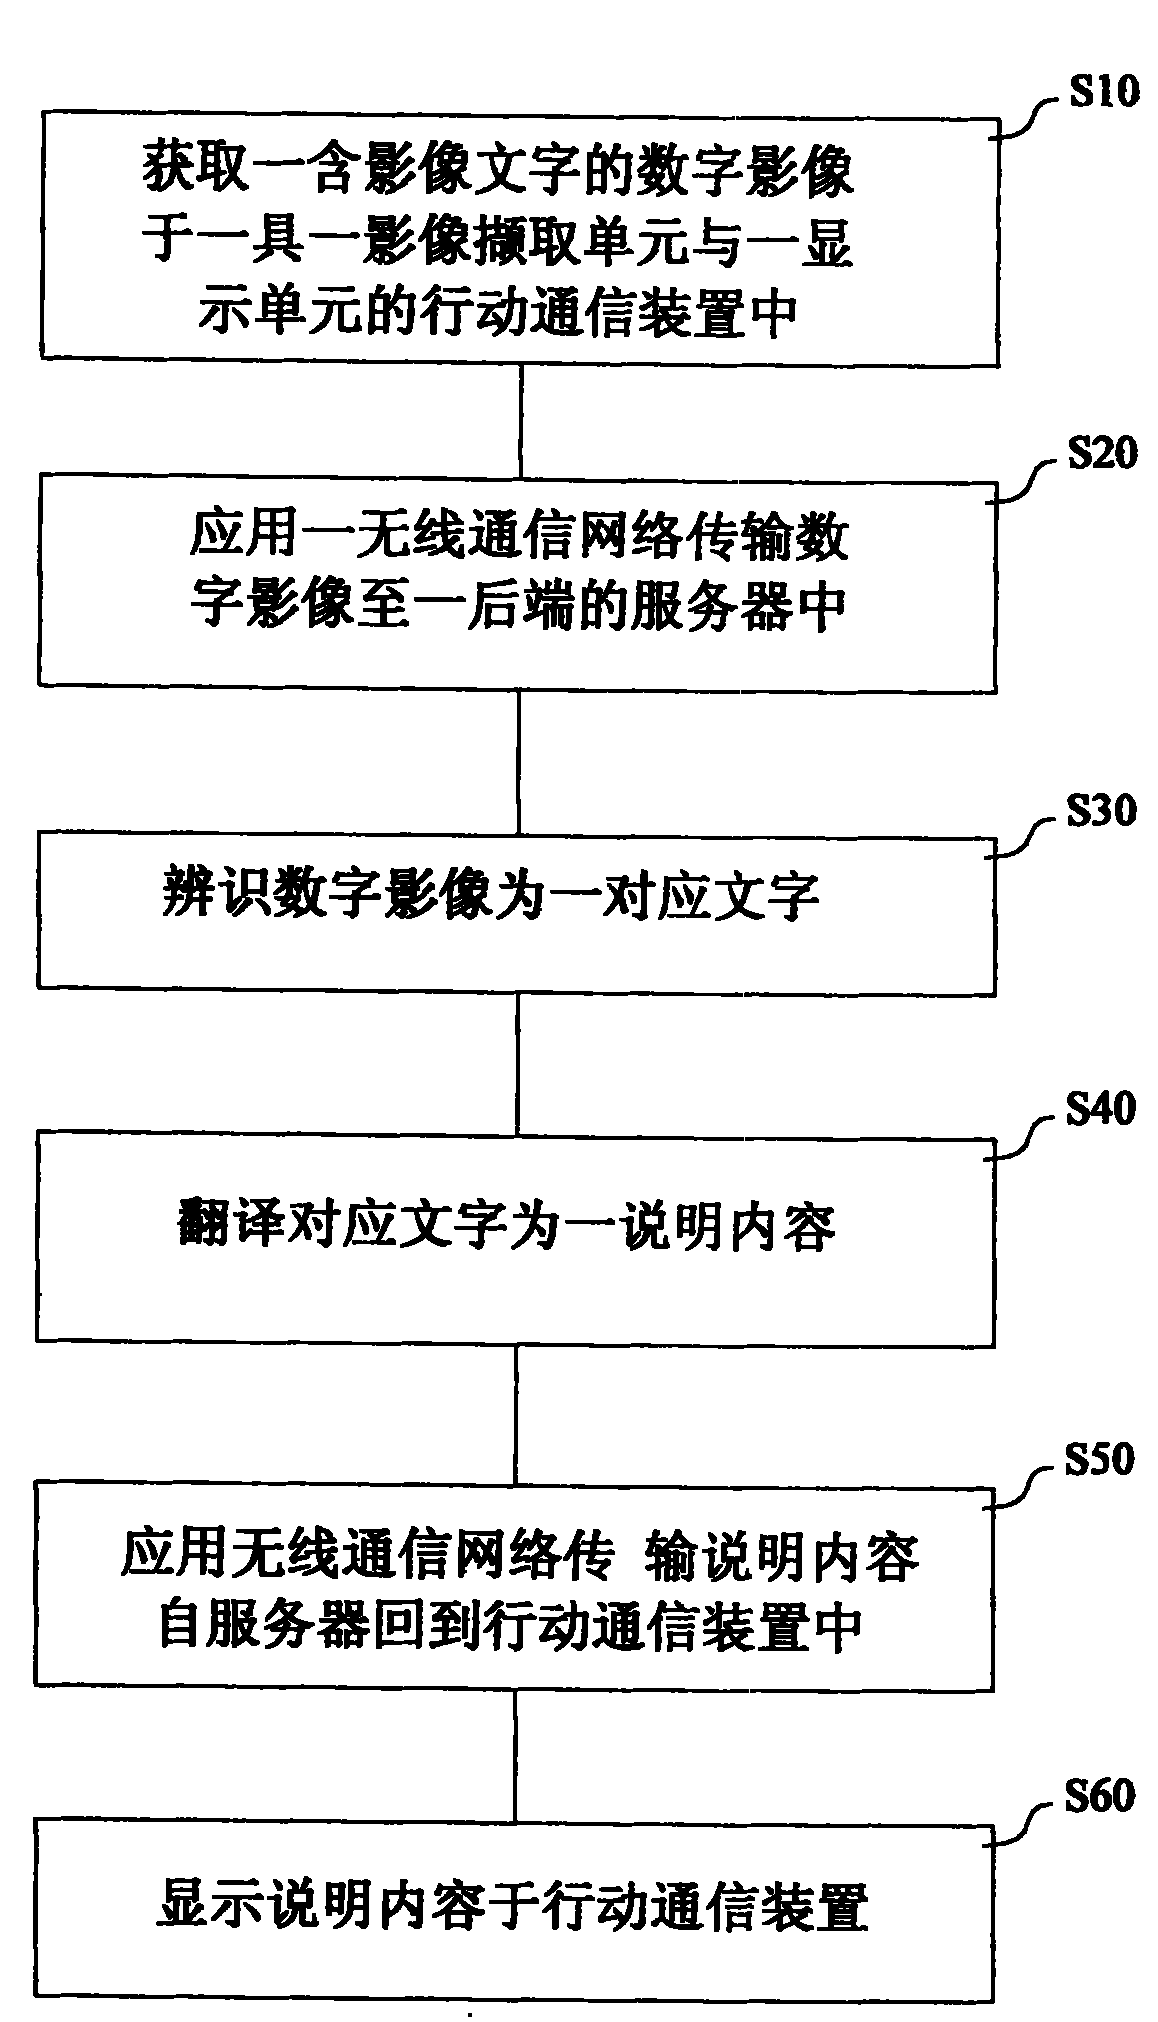 Method and system for translating video text based on mobile communication device